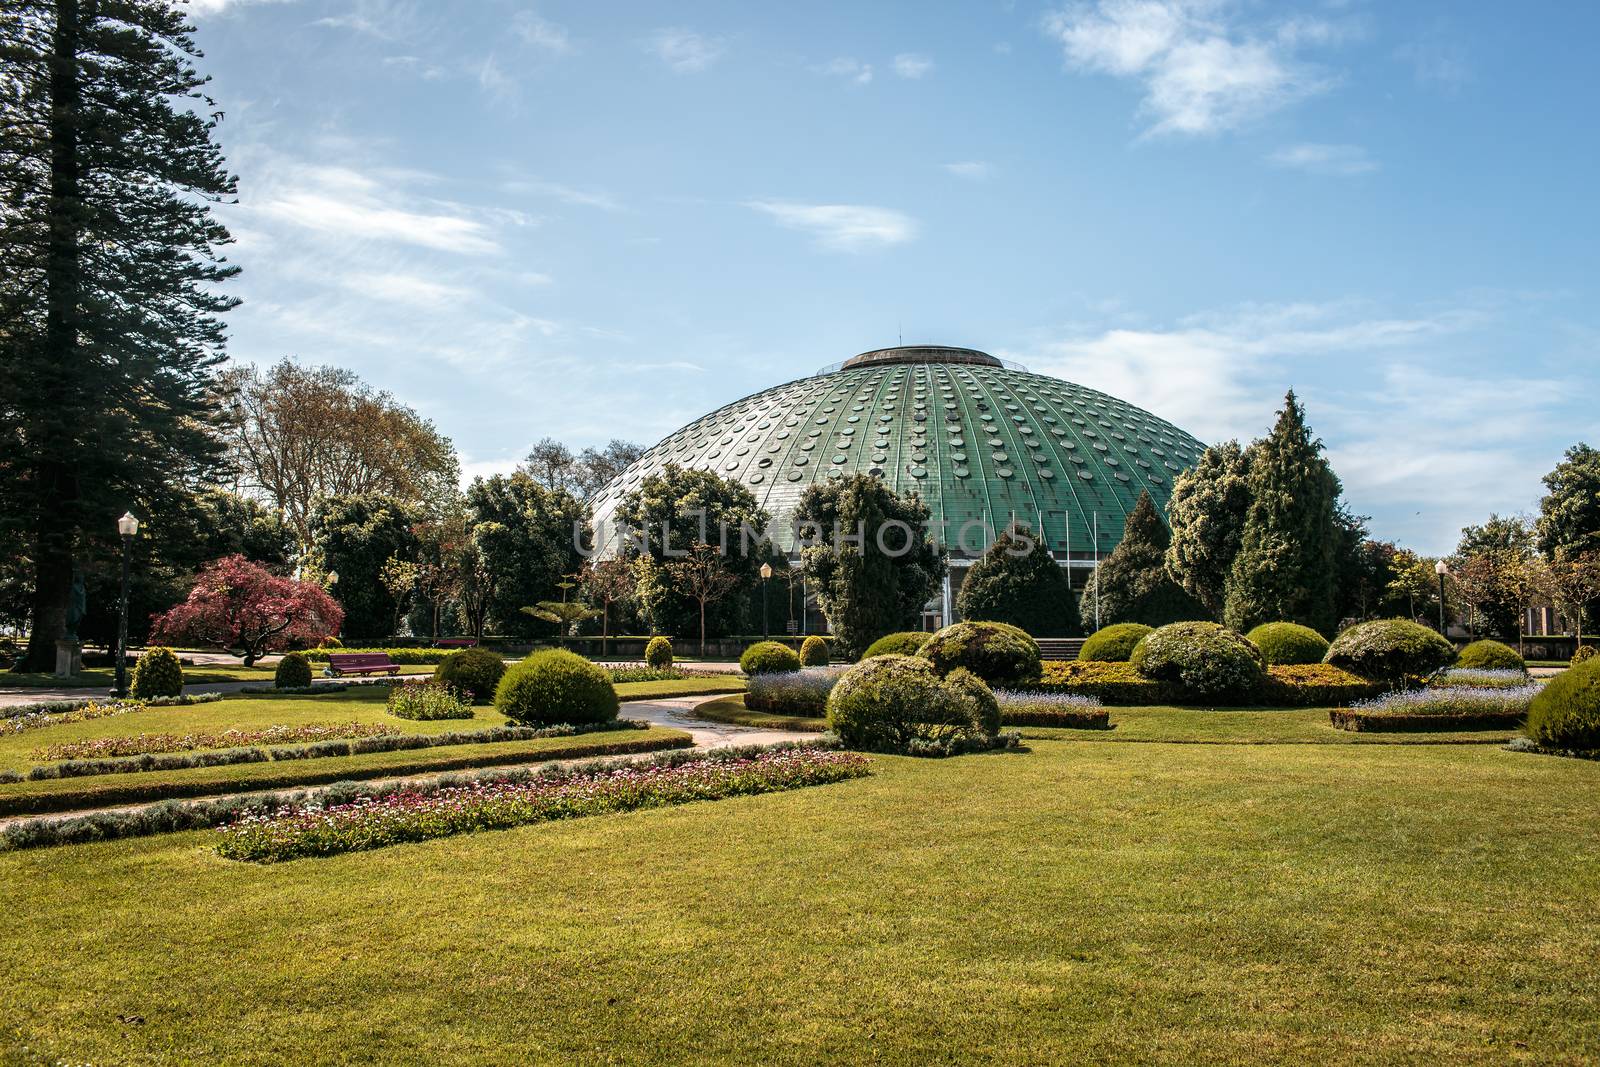 The famous Crystal palace architecture in Porto